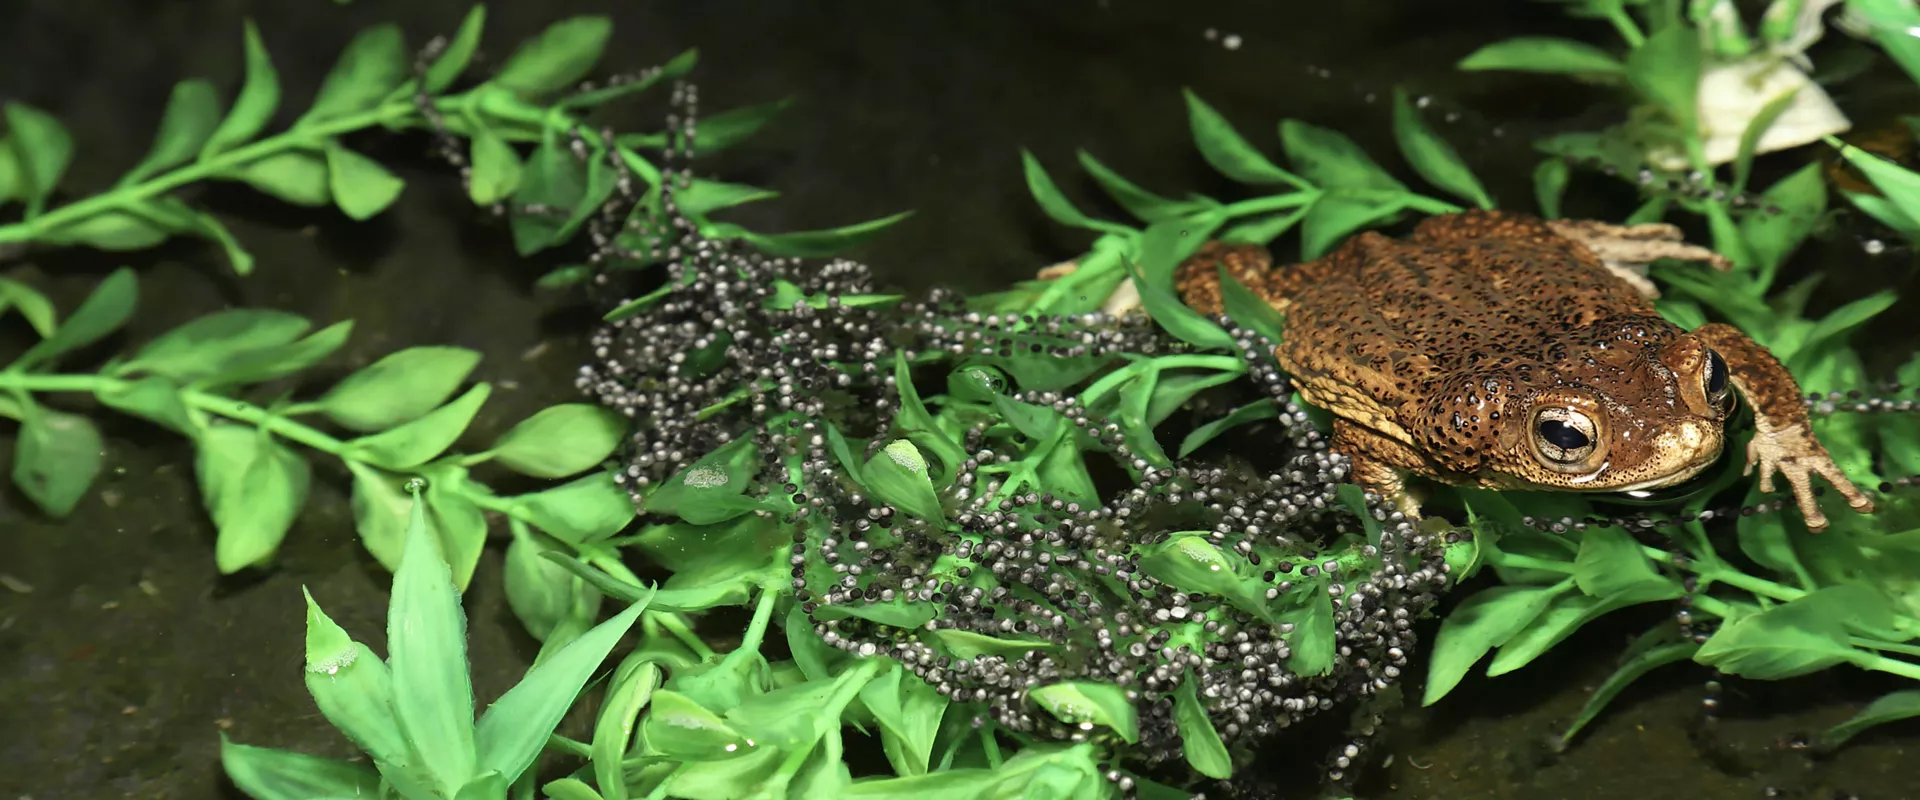 Conserving Endangered Caribbean Reptiles and Amphibians